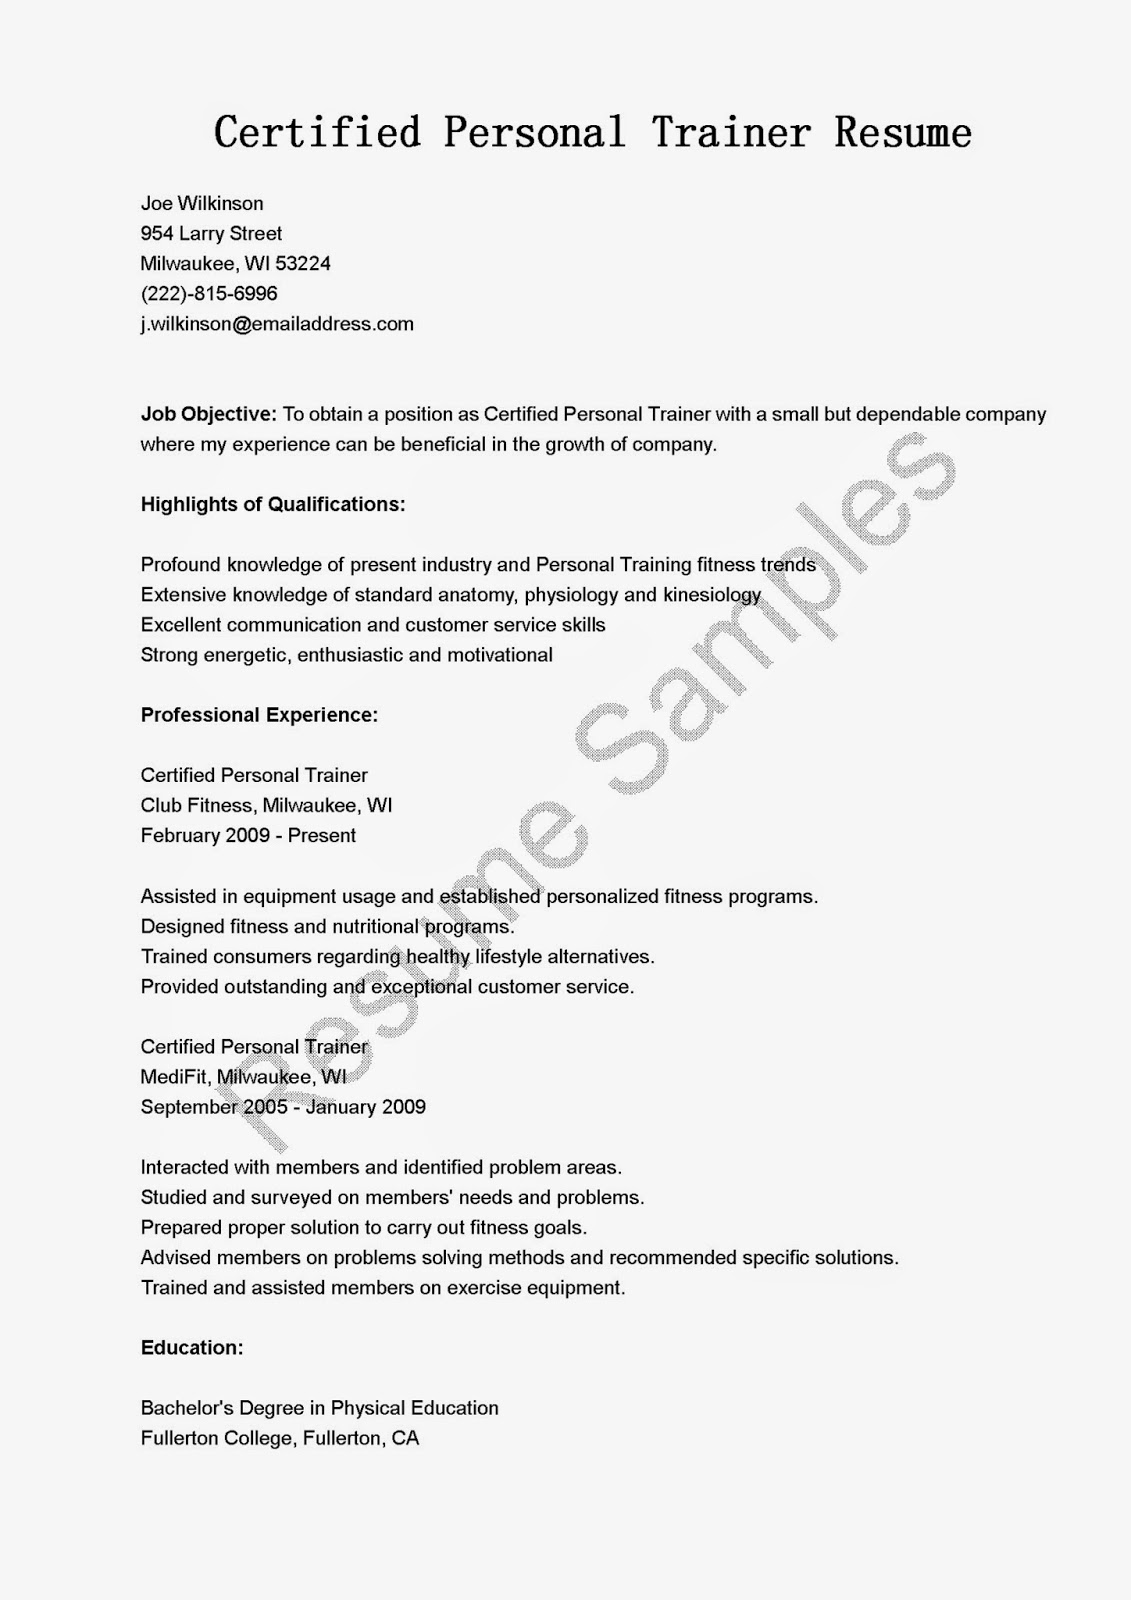 Resume questions to ask